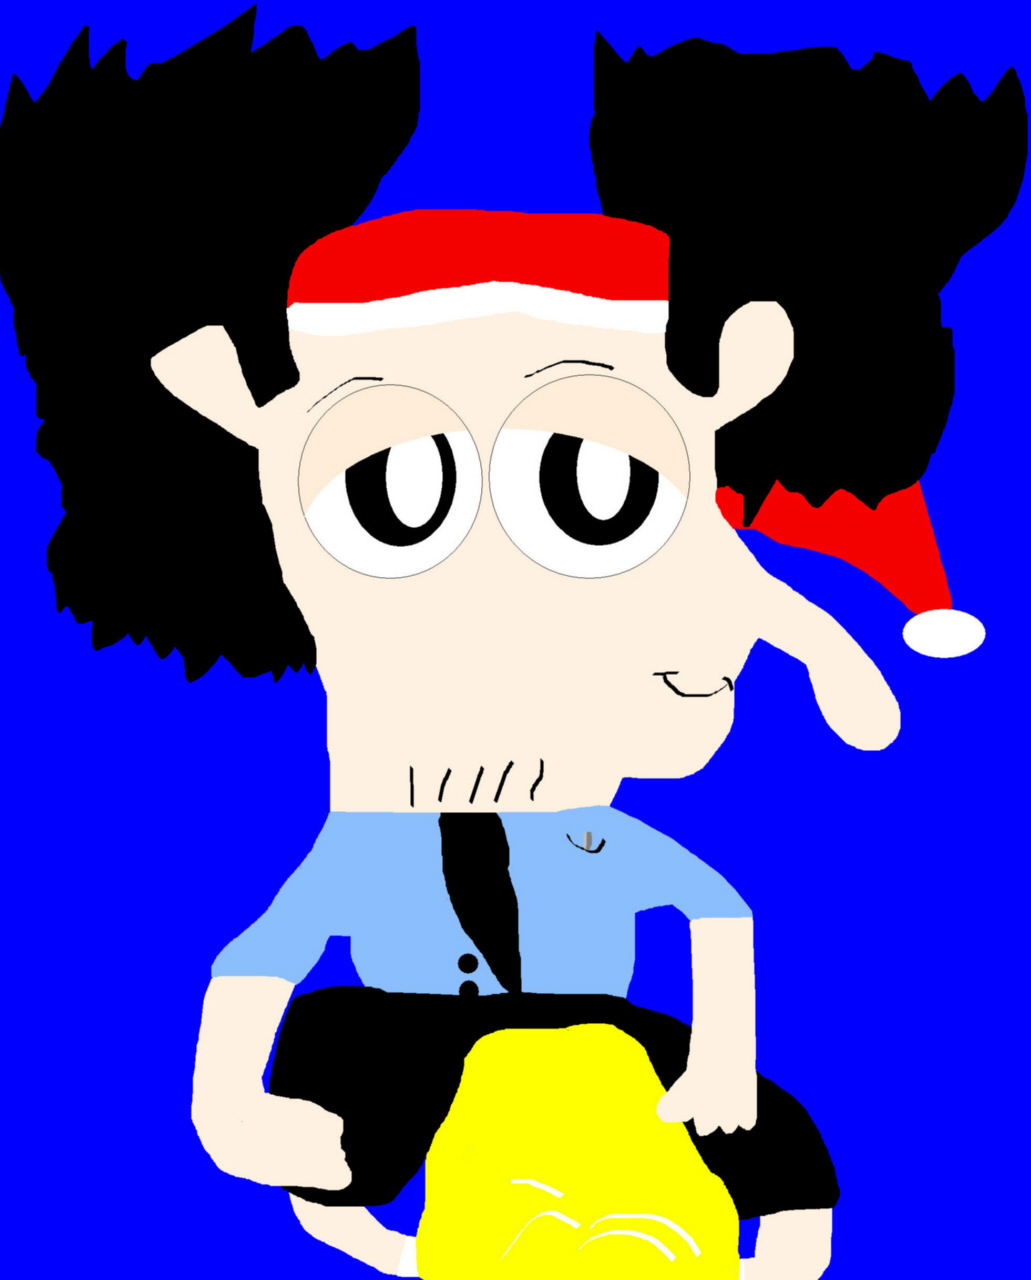 Alternate Chibi Noodman Relaxing With A Santa Hat On MS Paint I Was Bored by Falconlobo